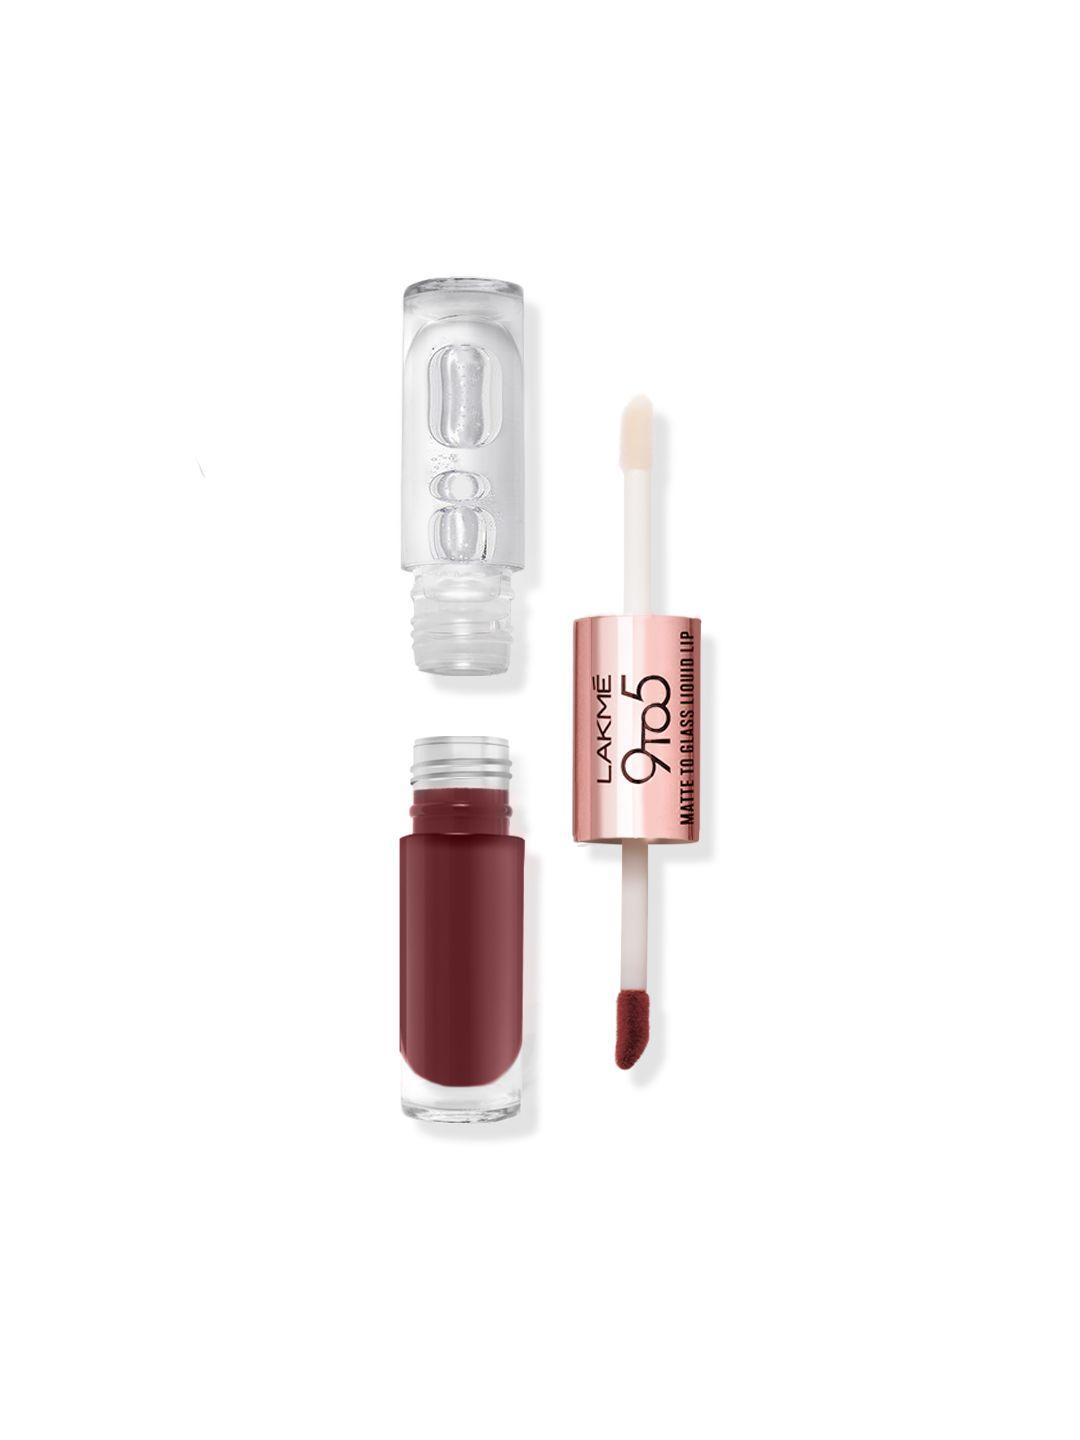 lakme 9to5 matte to glass transfer-proof liquid lip color 7.6ml - beachy vibe